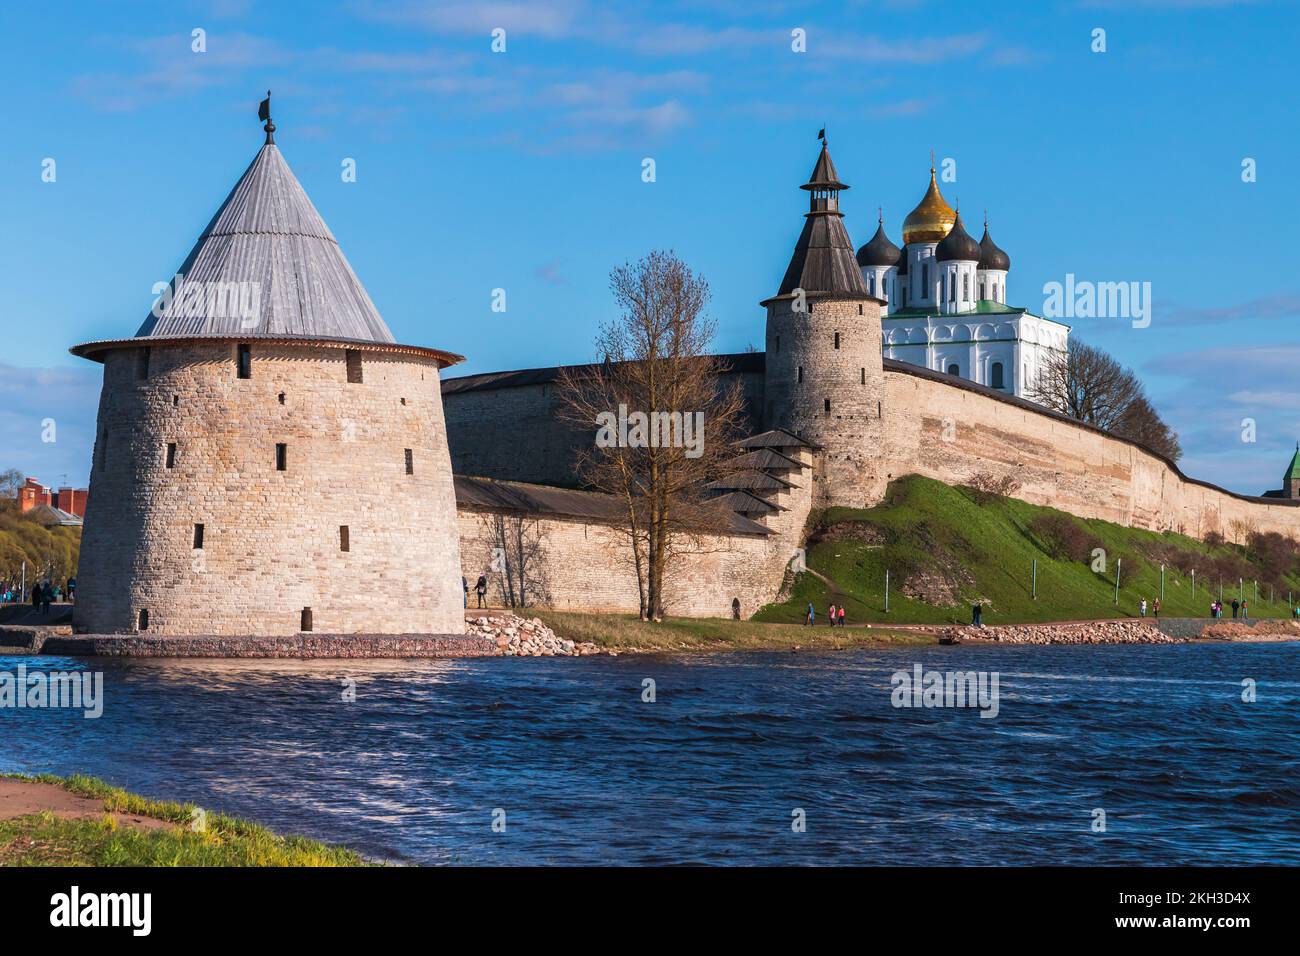 Pskov landscape with Kremlin, ancient coastal fortification in Russia Stock Photo